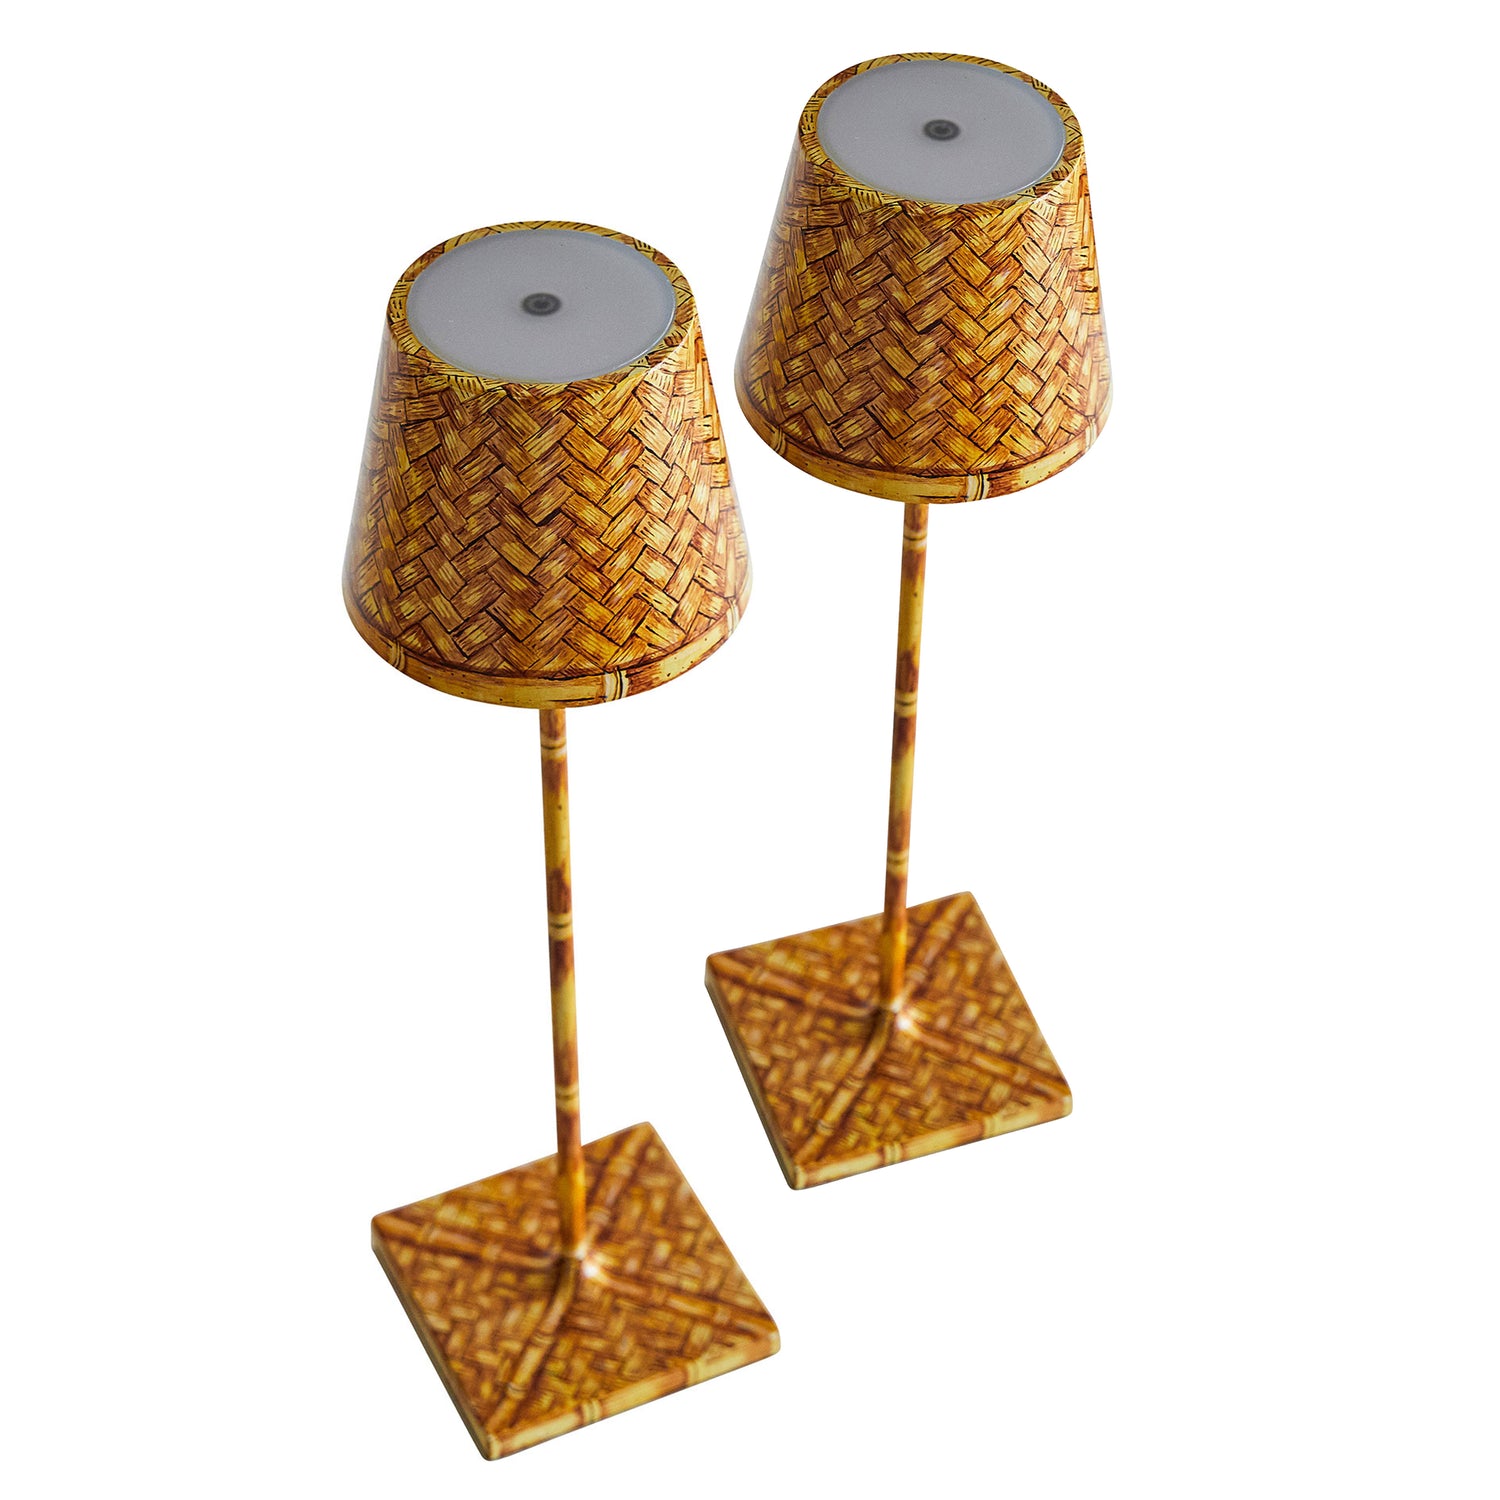 Hand-Painted Faux-Bamboo Wireless Table Lamp